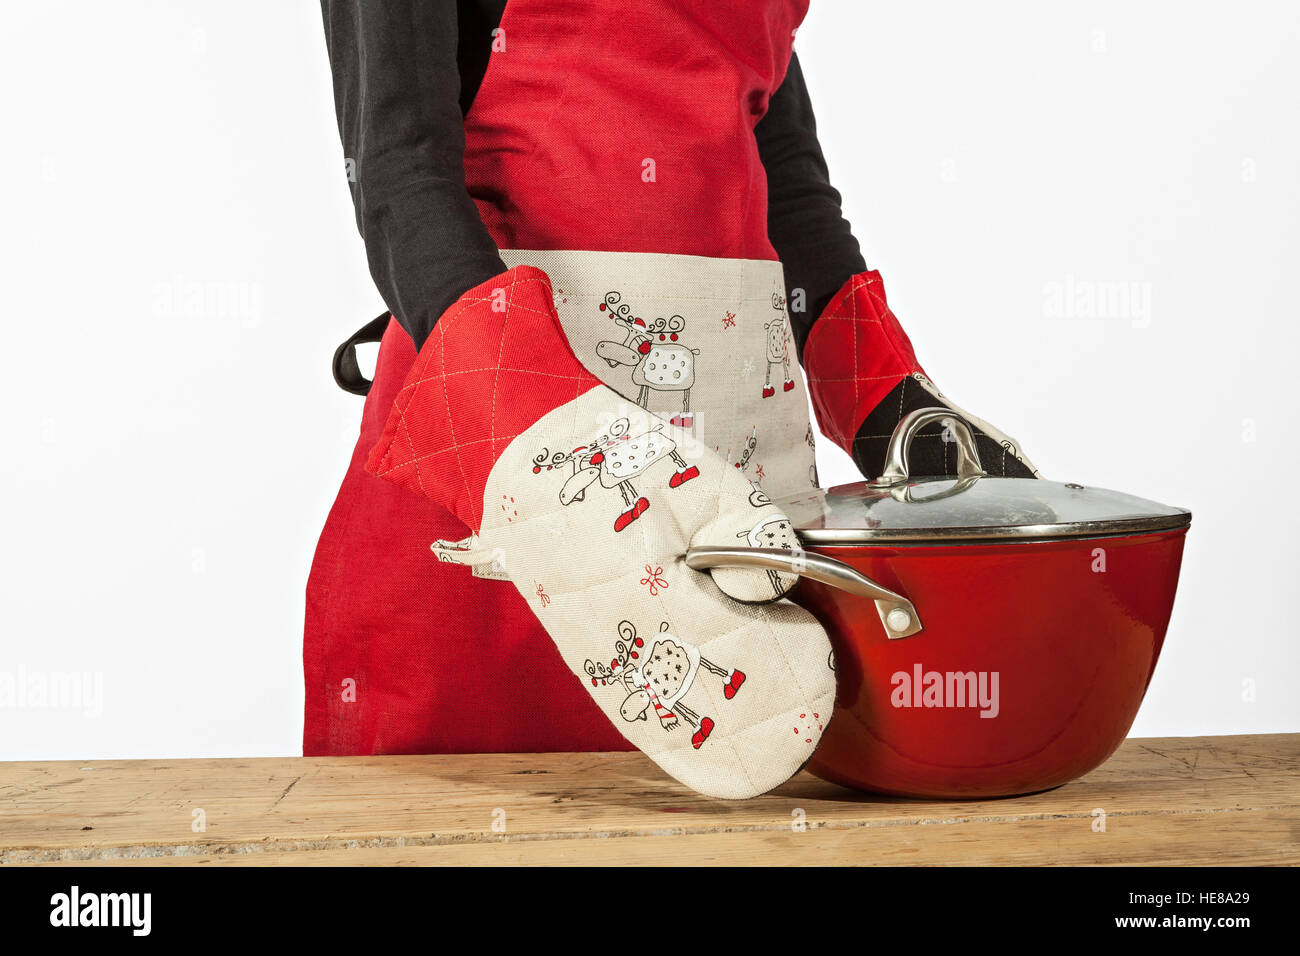 Woman with gloves and apron making Christmas dish Stock Photo